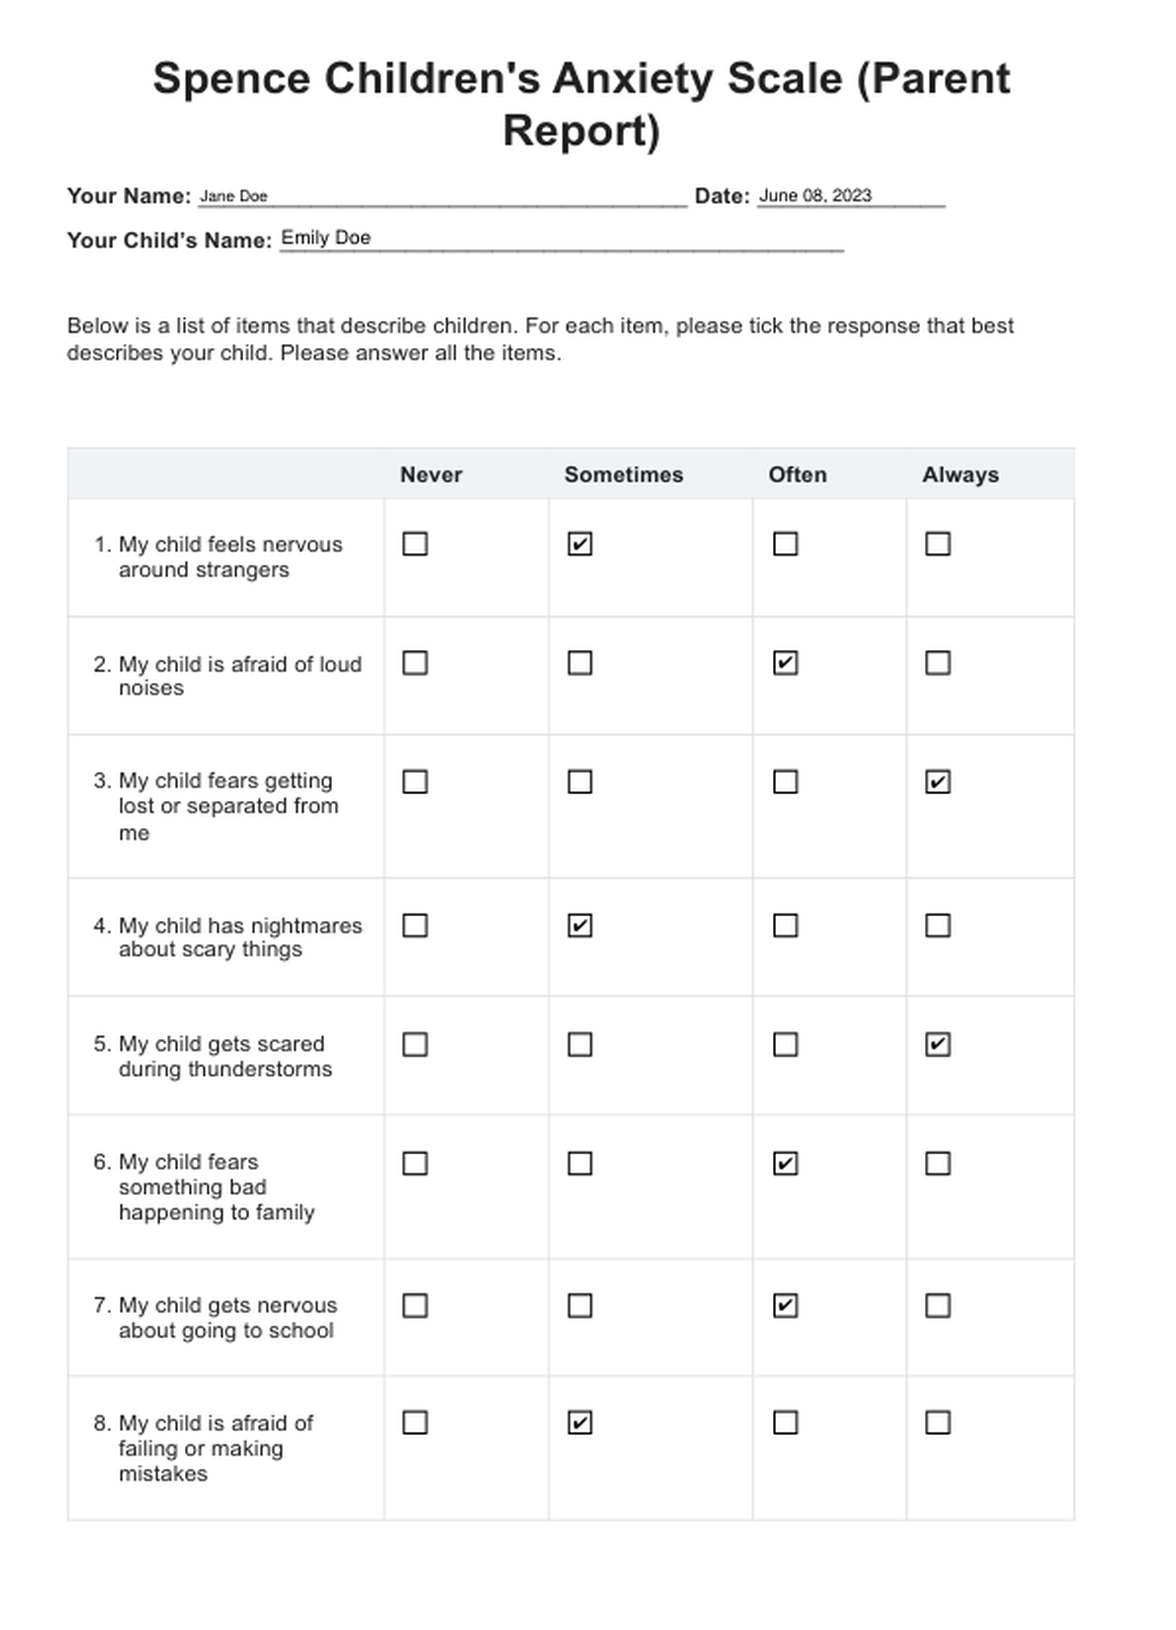 Spence Children's Anxiety Scale - Parent Report PDF Example